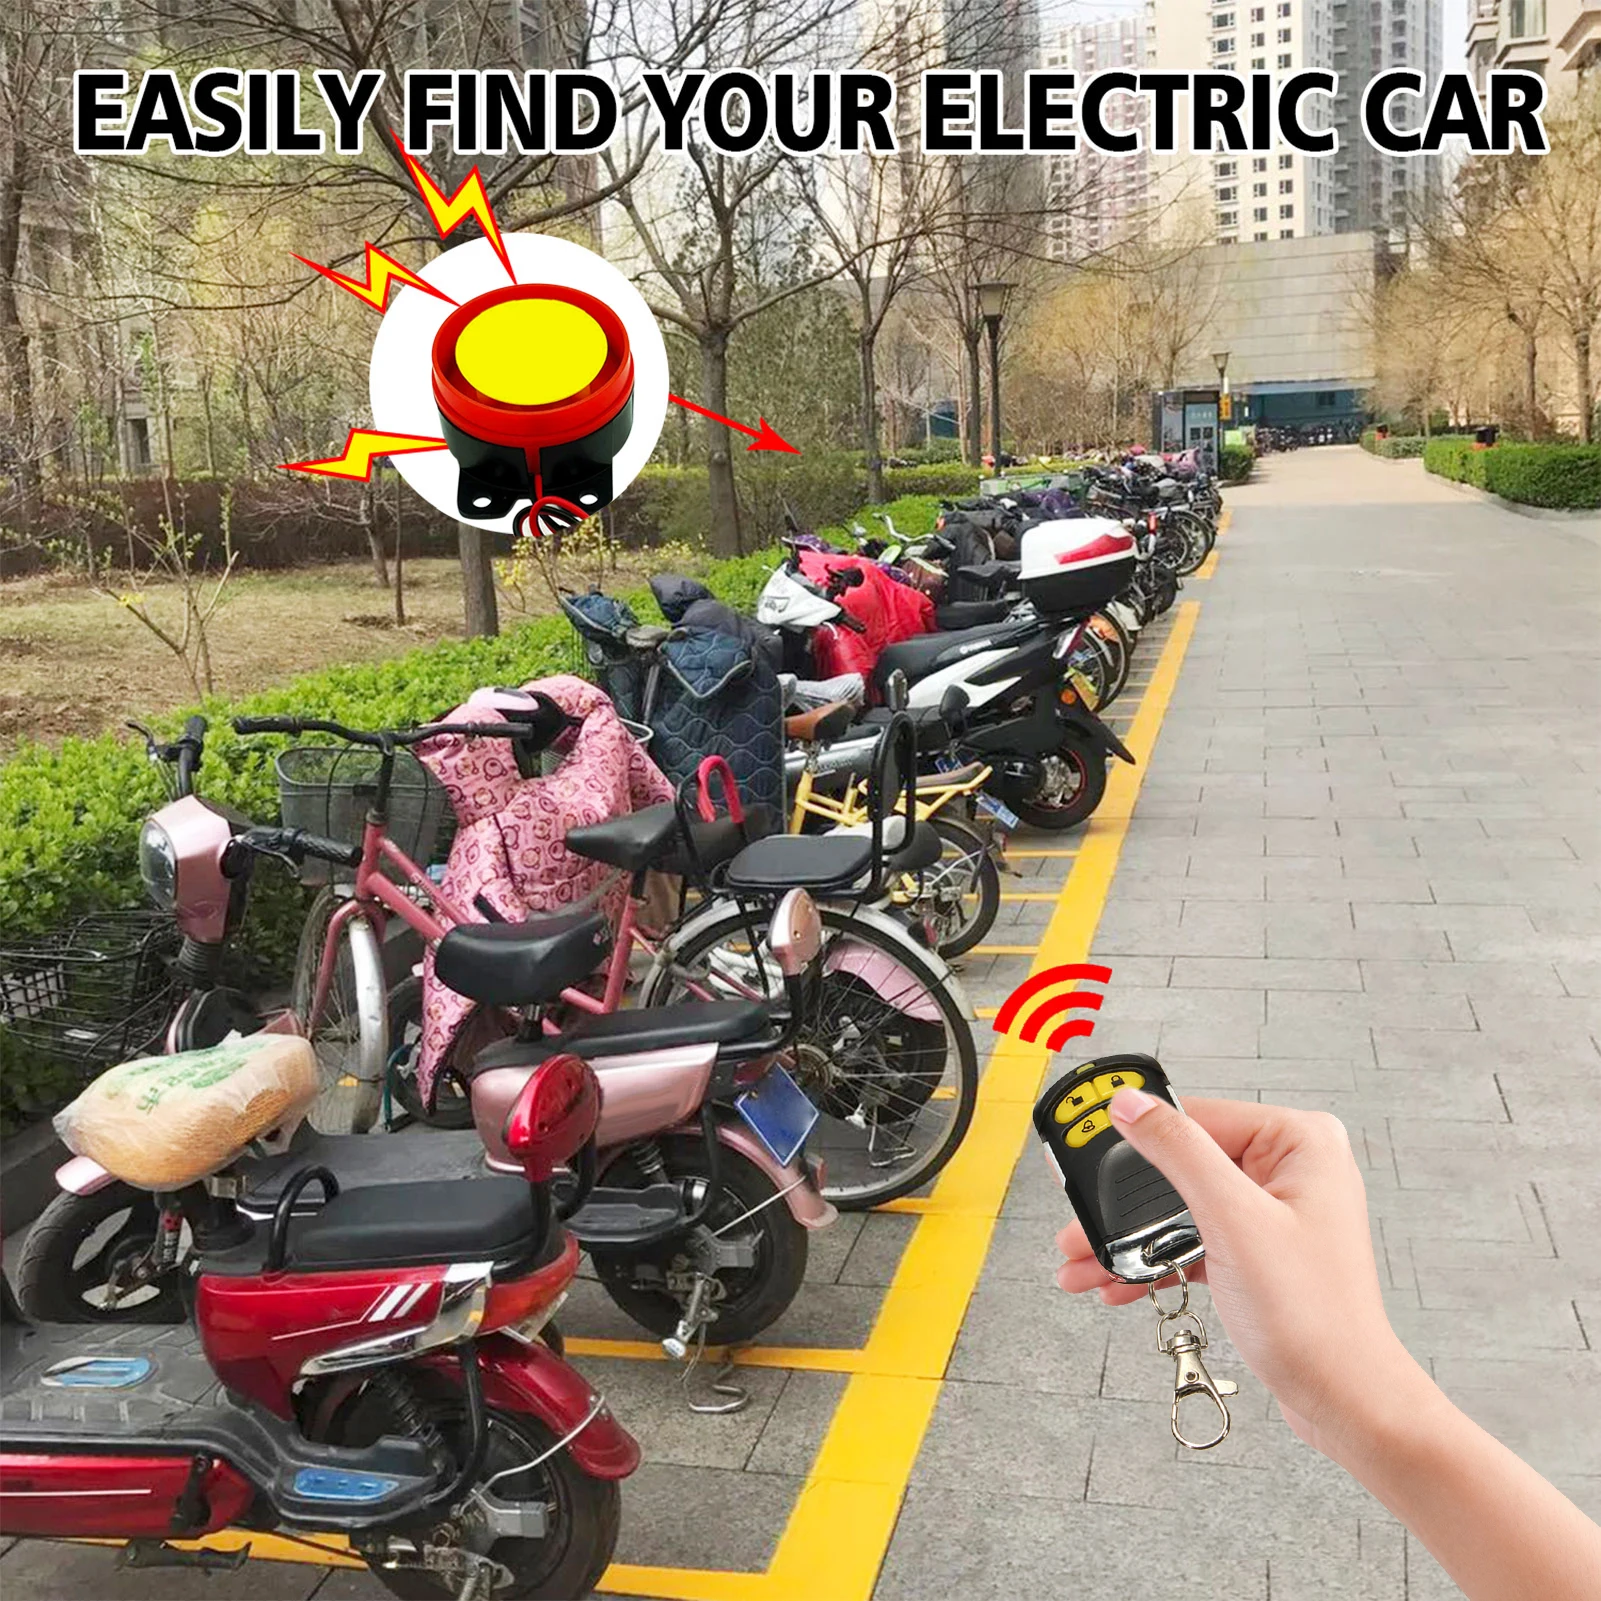 

12V Universal Motorcycle Motorbike Scooter Anti Theft Security Alarm System With Remote Control 125db Motorcycle Speaker